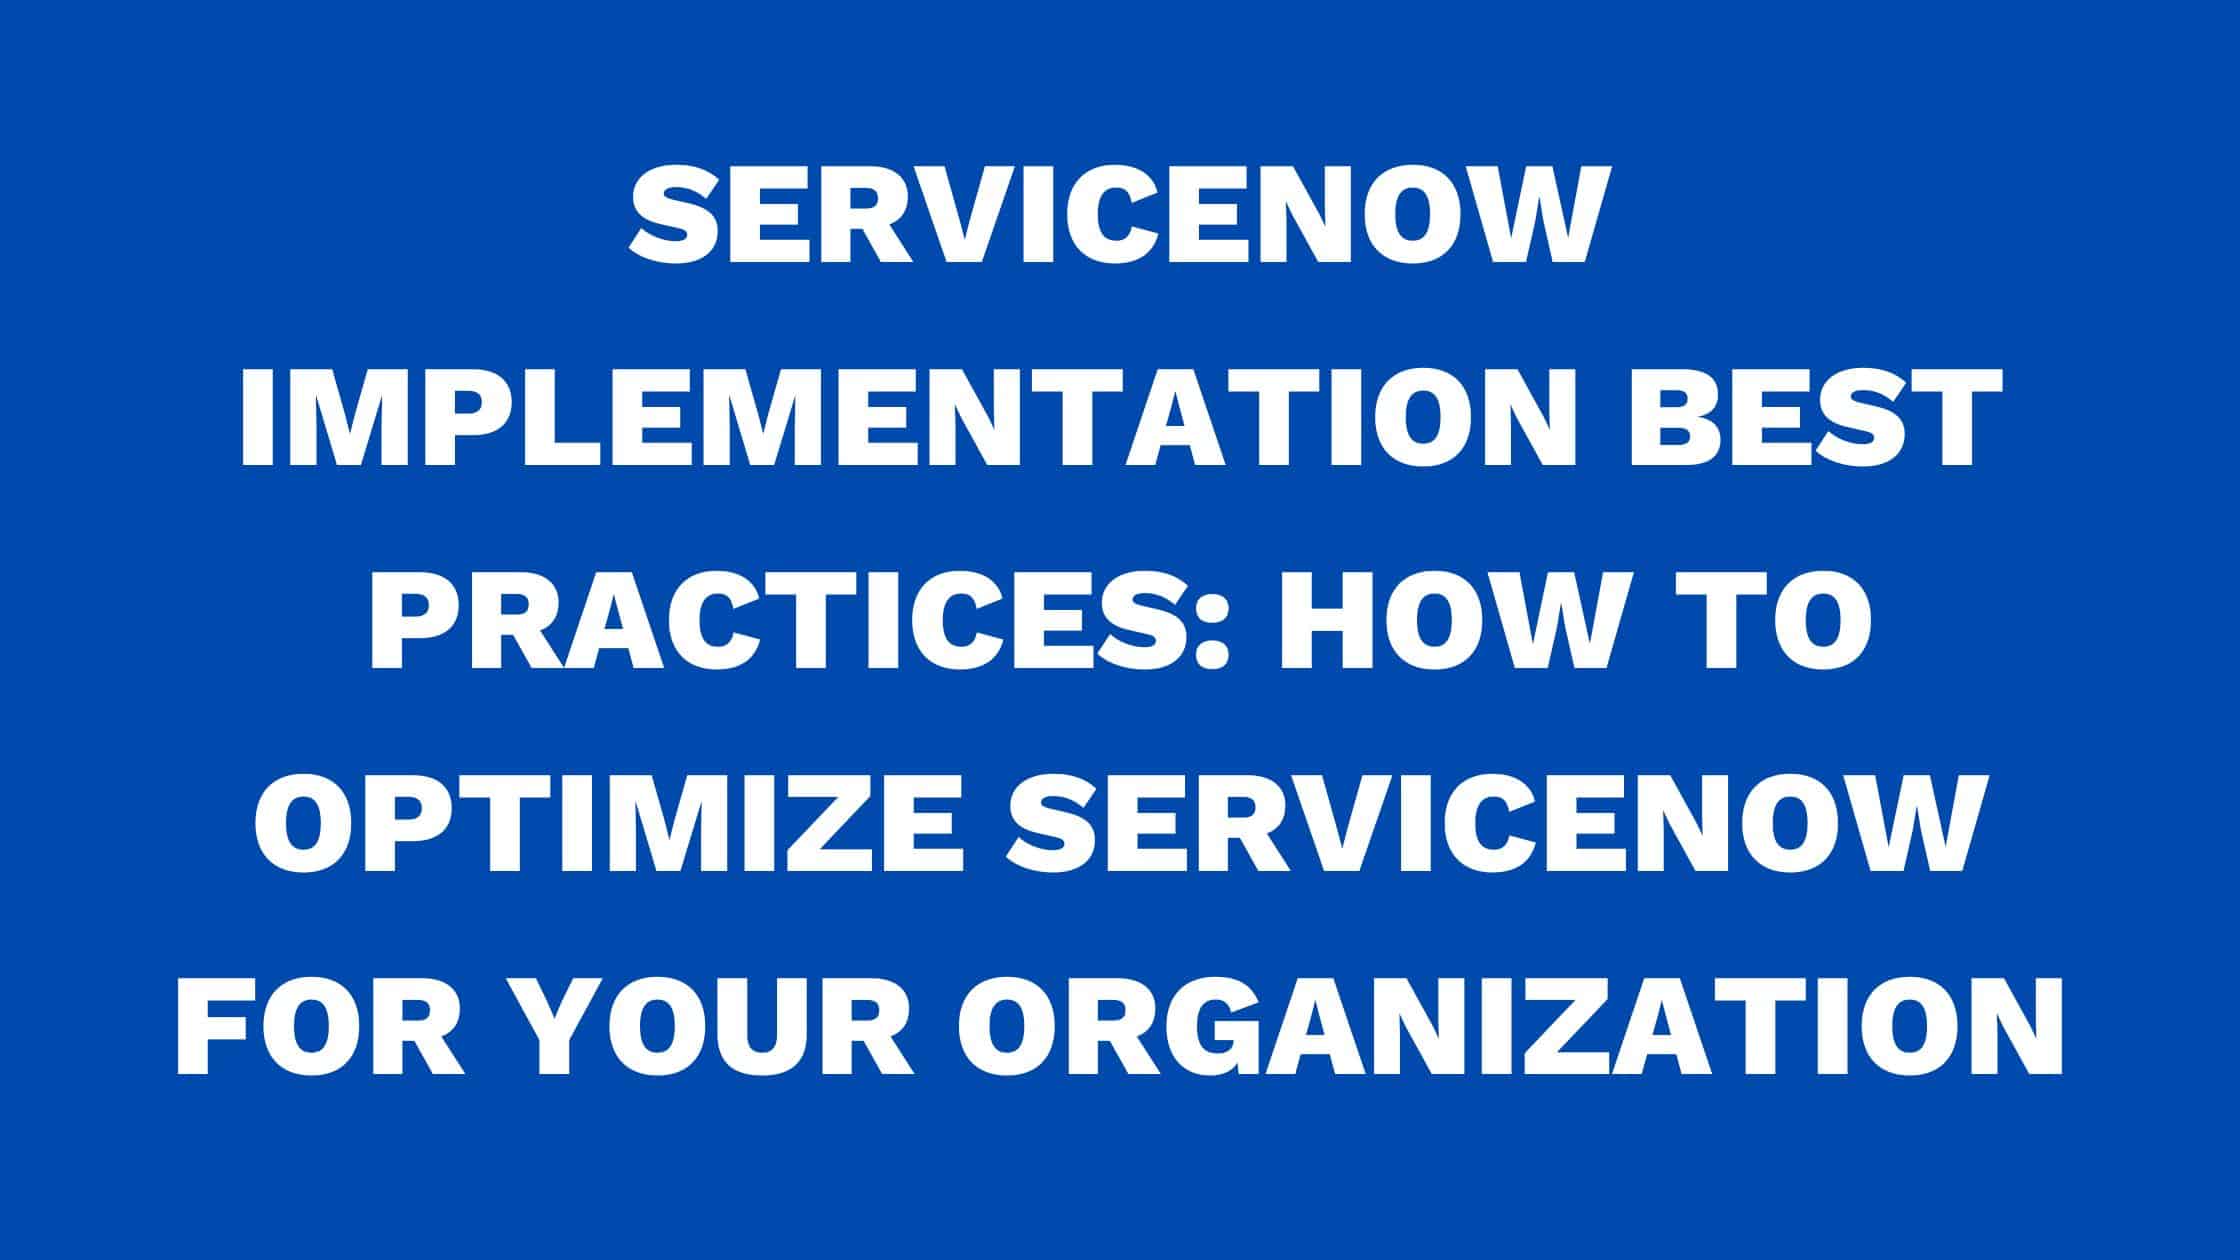 ServiceNow implementation best practices: How to optimize ServiceNow for your organization